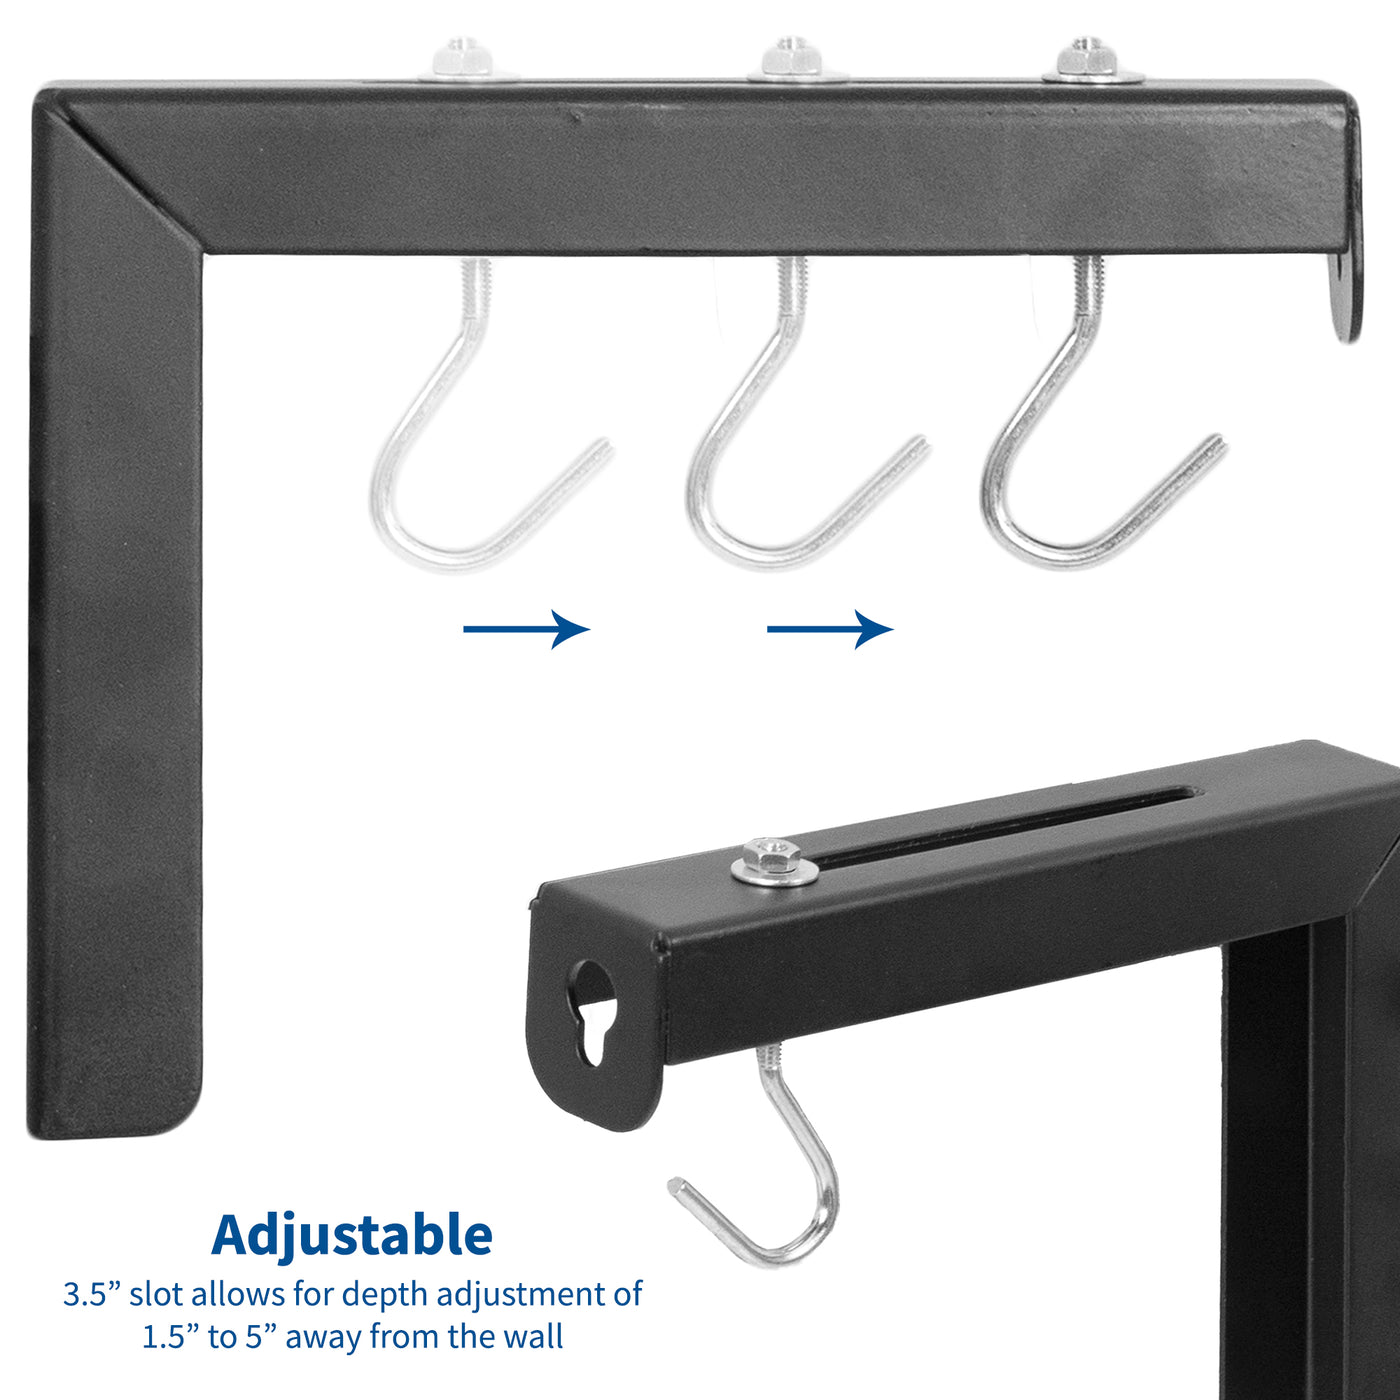 Adjustment slot provided along hook slot to best adapt to space along the wall.